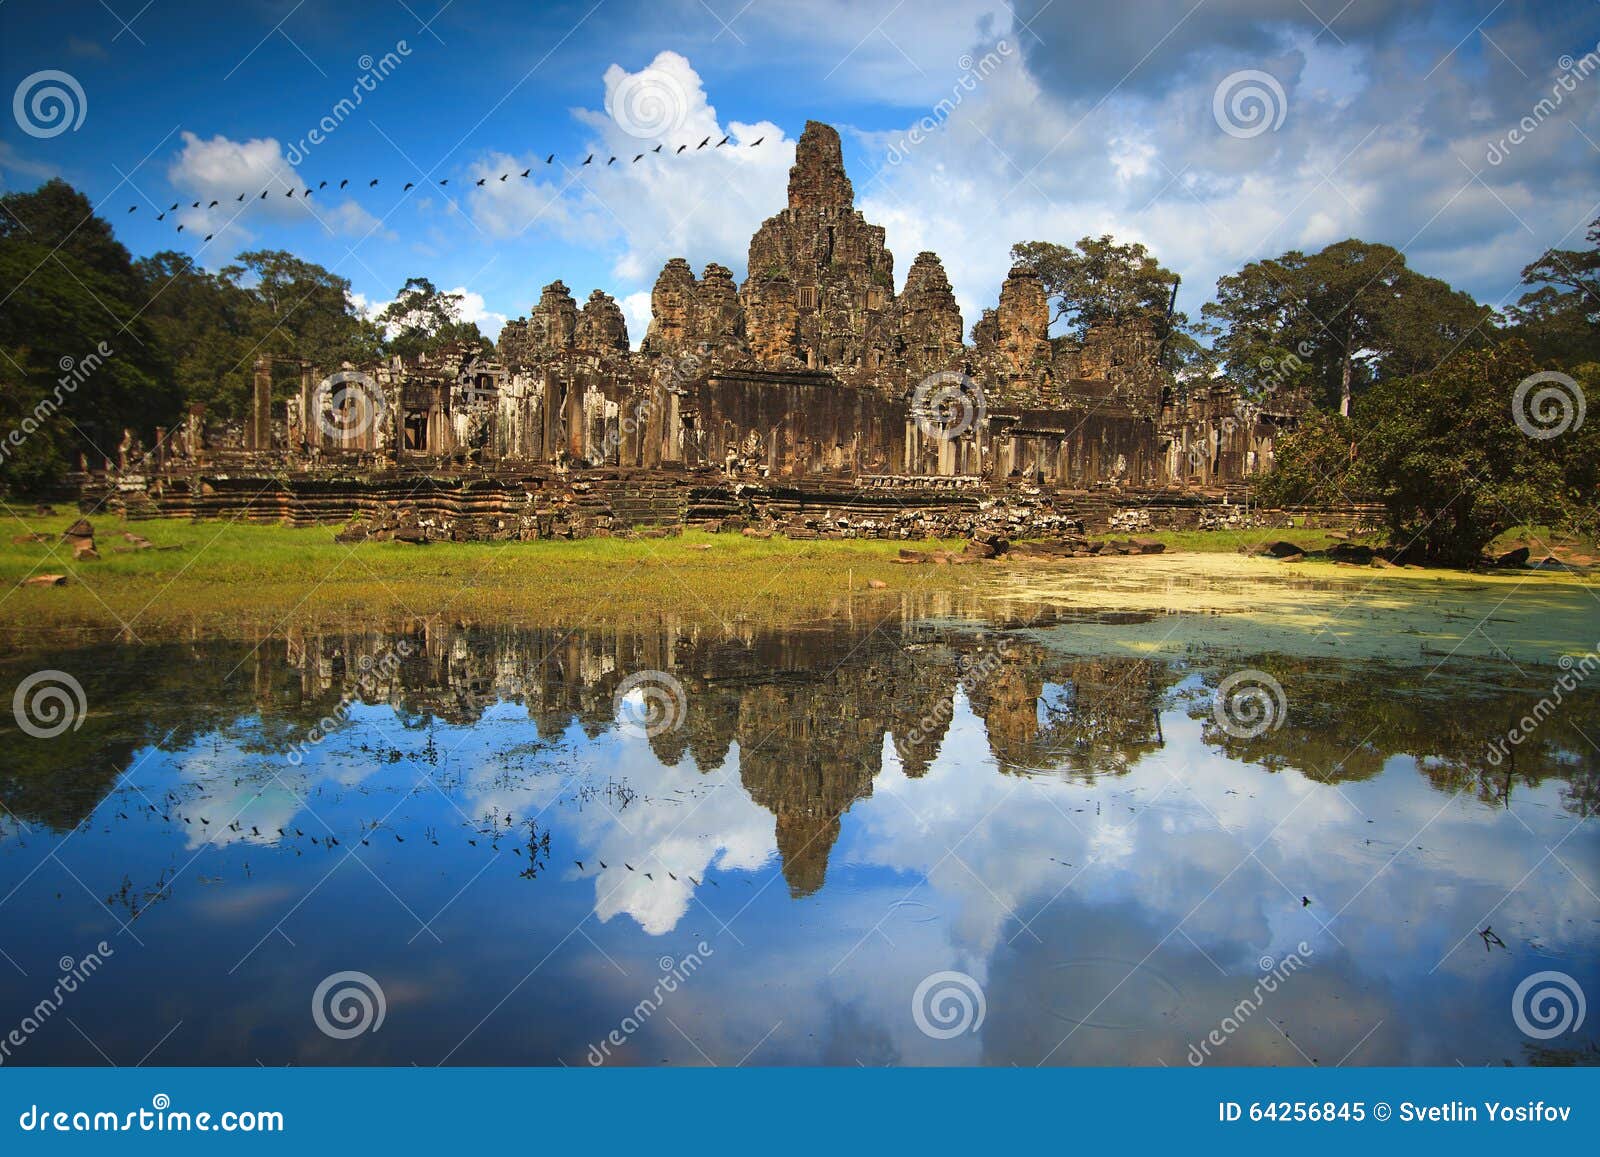 bayon temple in siem reap, cambodia.